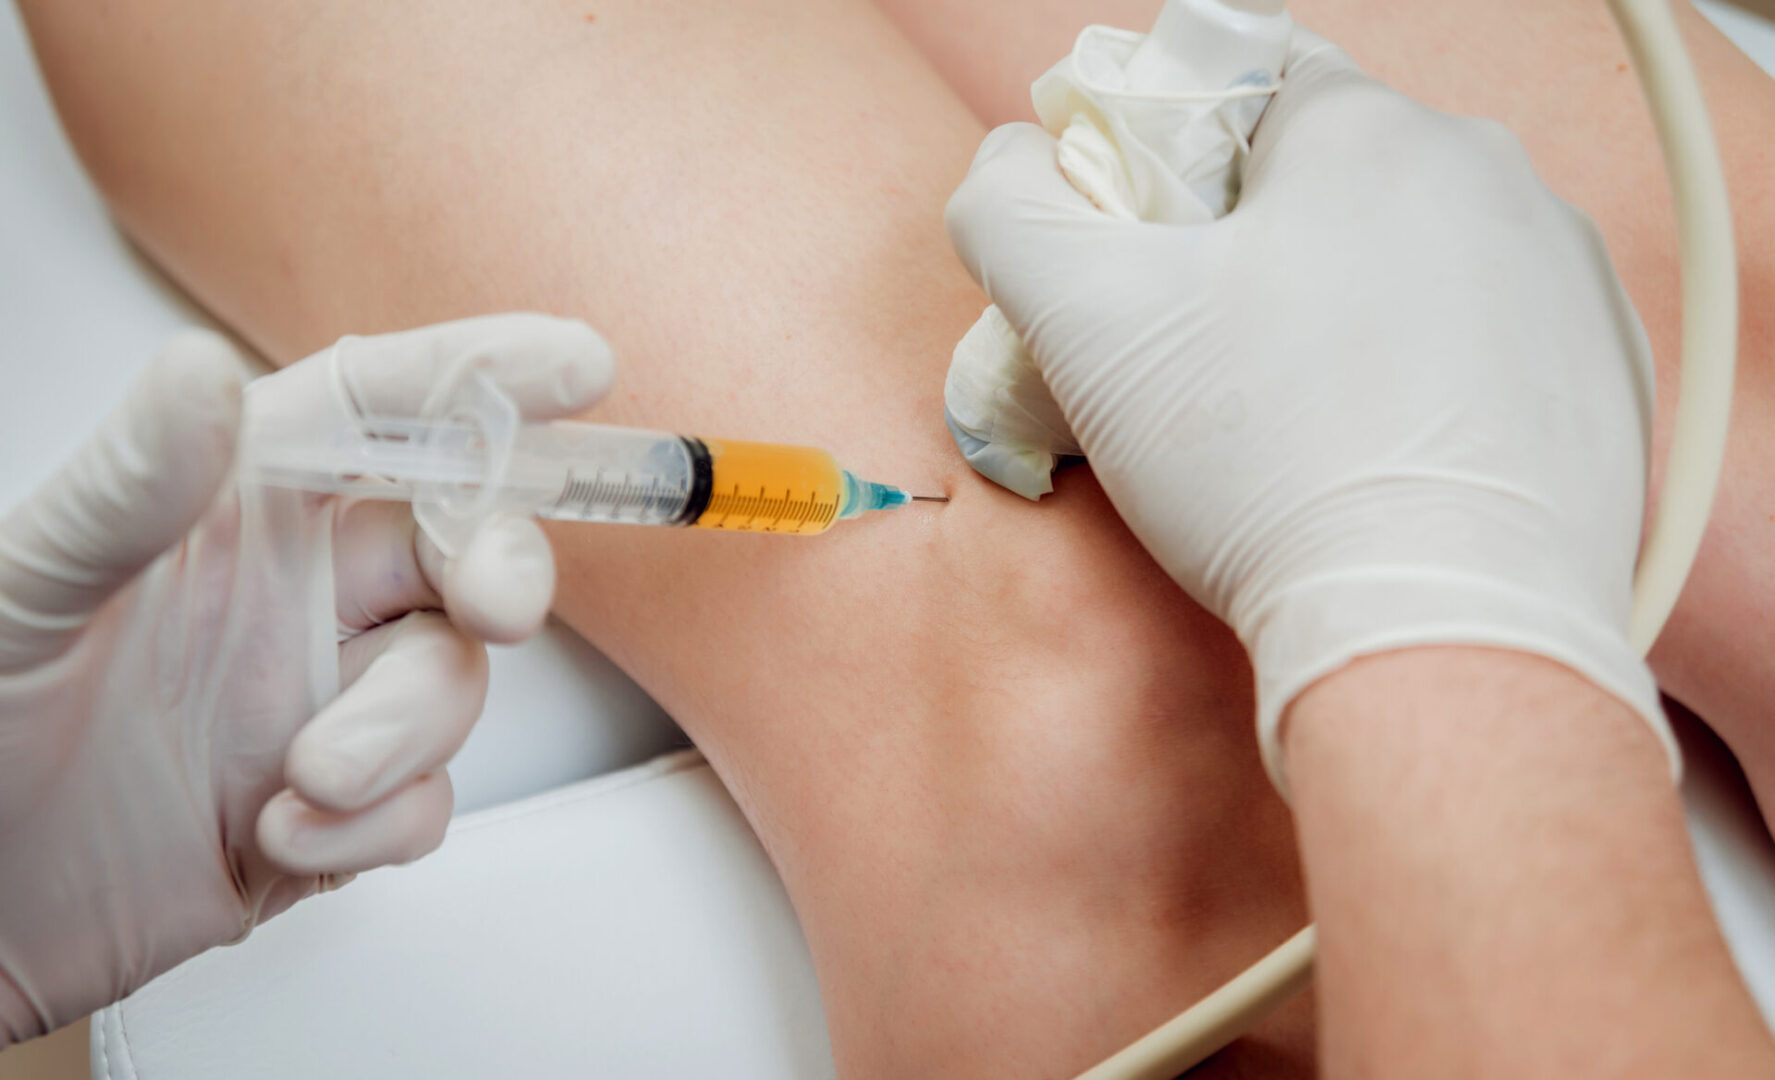 A person getting an injection in their leg.